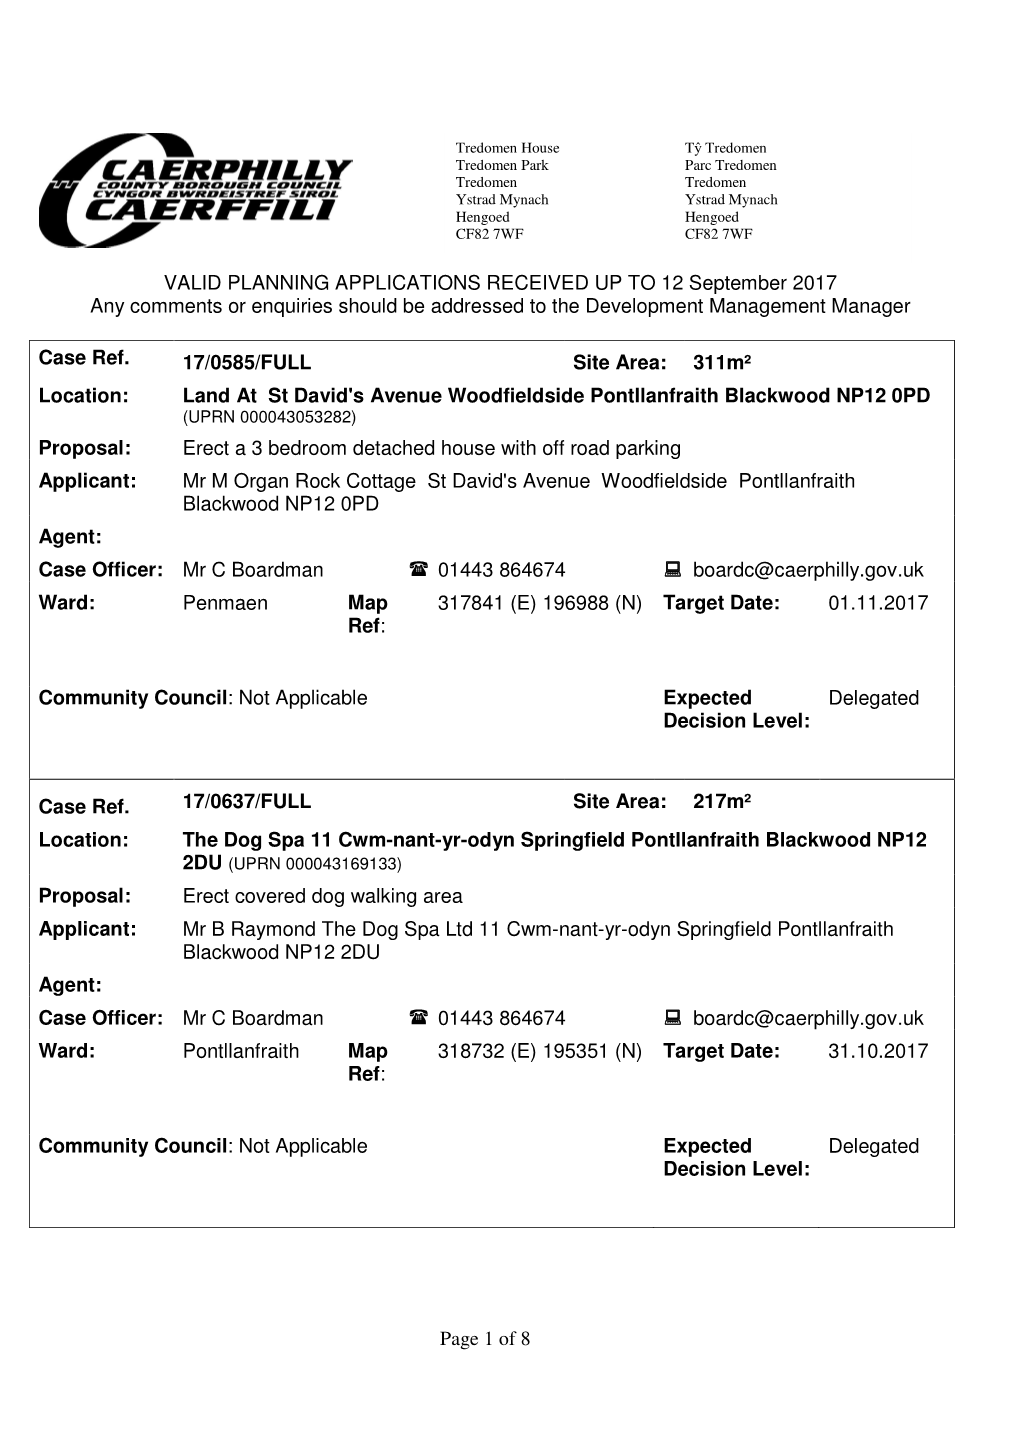 Page 1 of 8 VALID PLANNING APPLICATIONS RECEIVED up TO